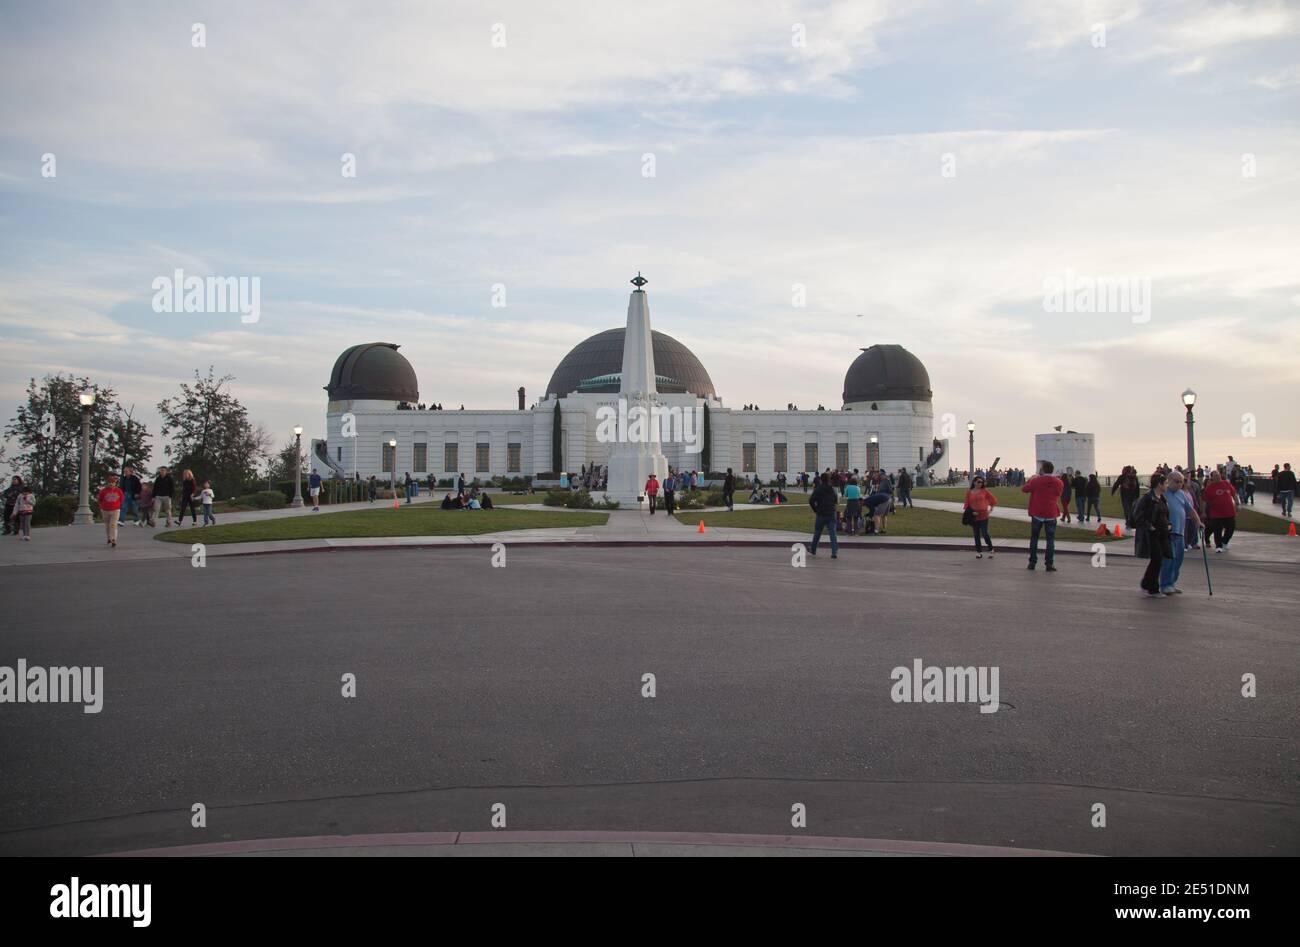 Los Angeles,California-05.January 2014:The world-renown Griffith Observatory at the top of the mountain in Griffith Park in Los Angeles. Stock Photo